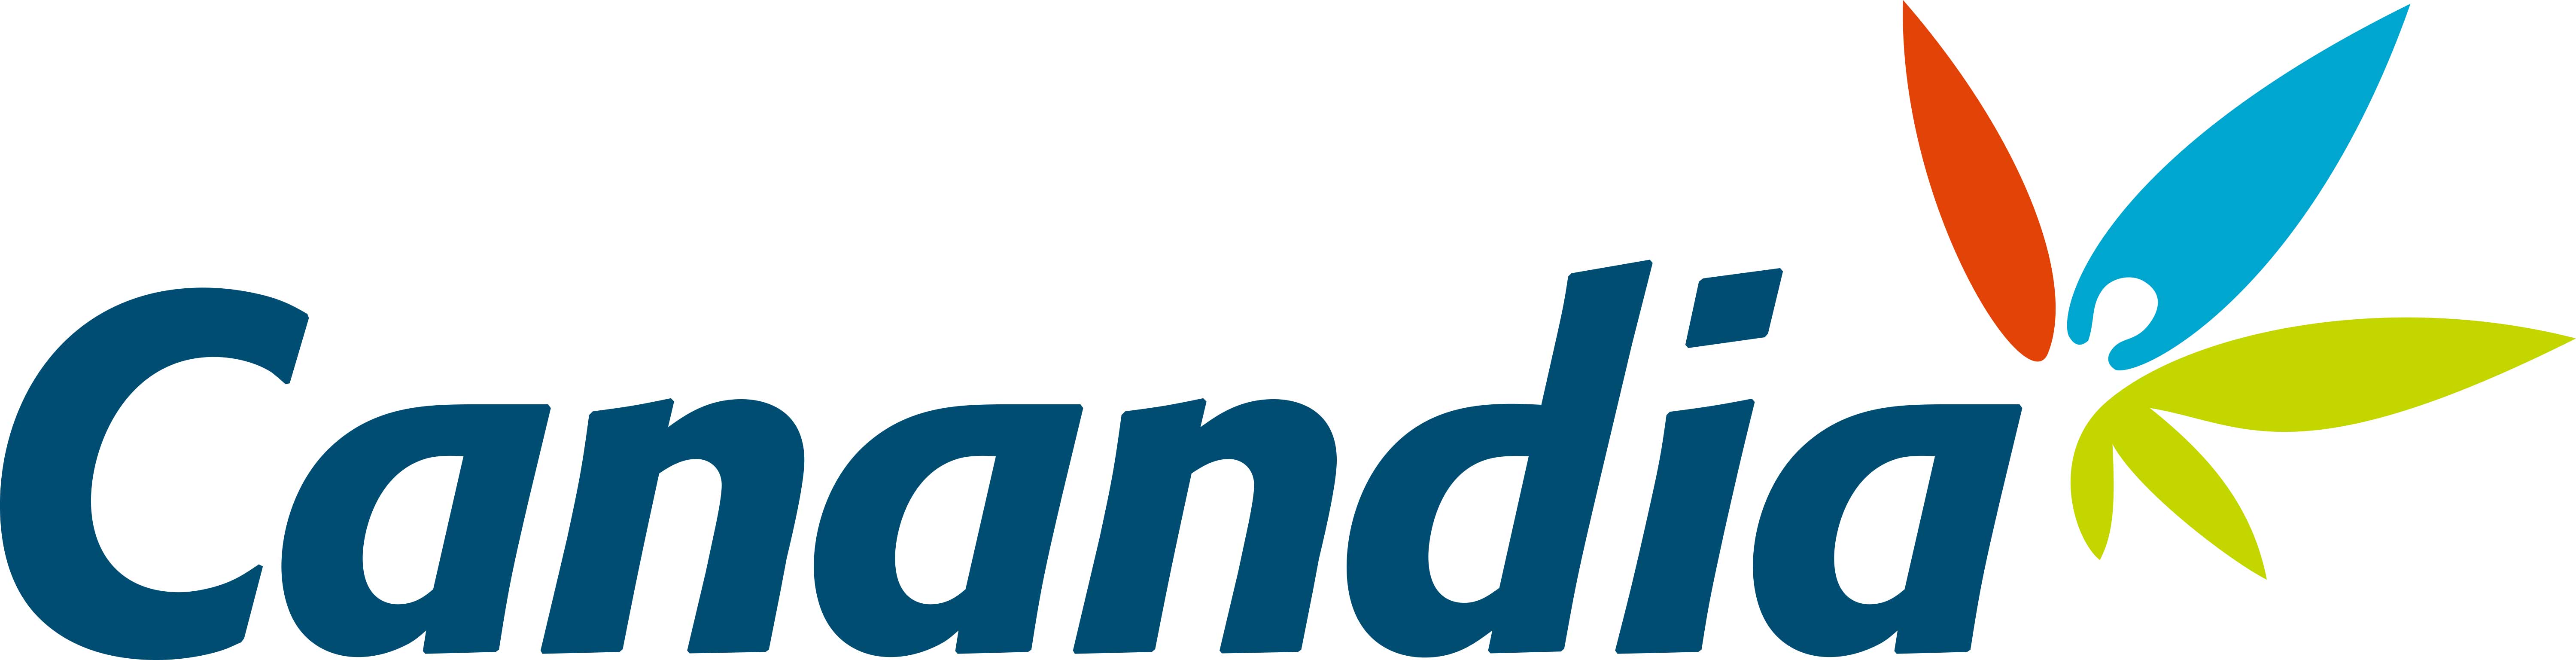 Canandia Corporate Identity Branding by NextPhase